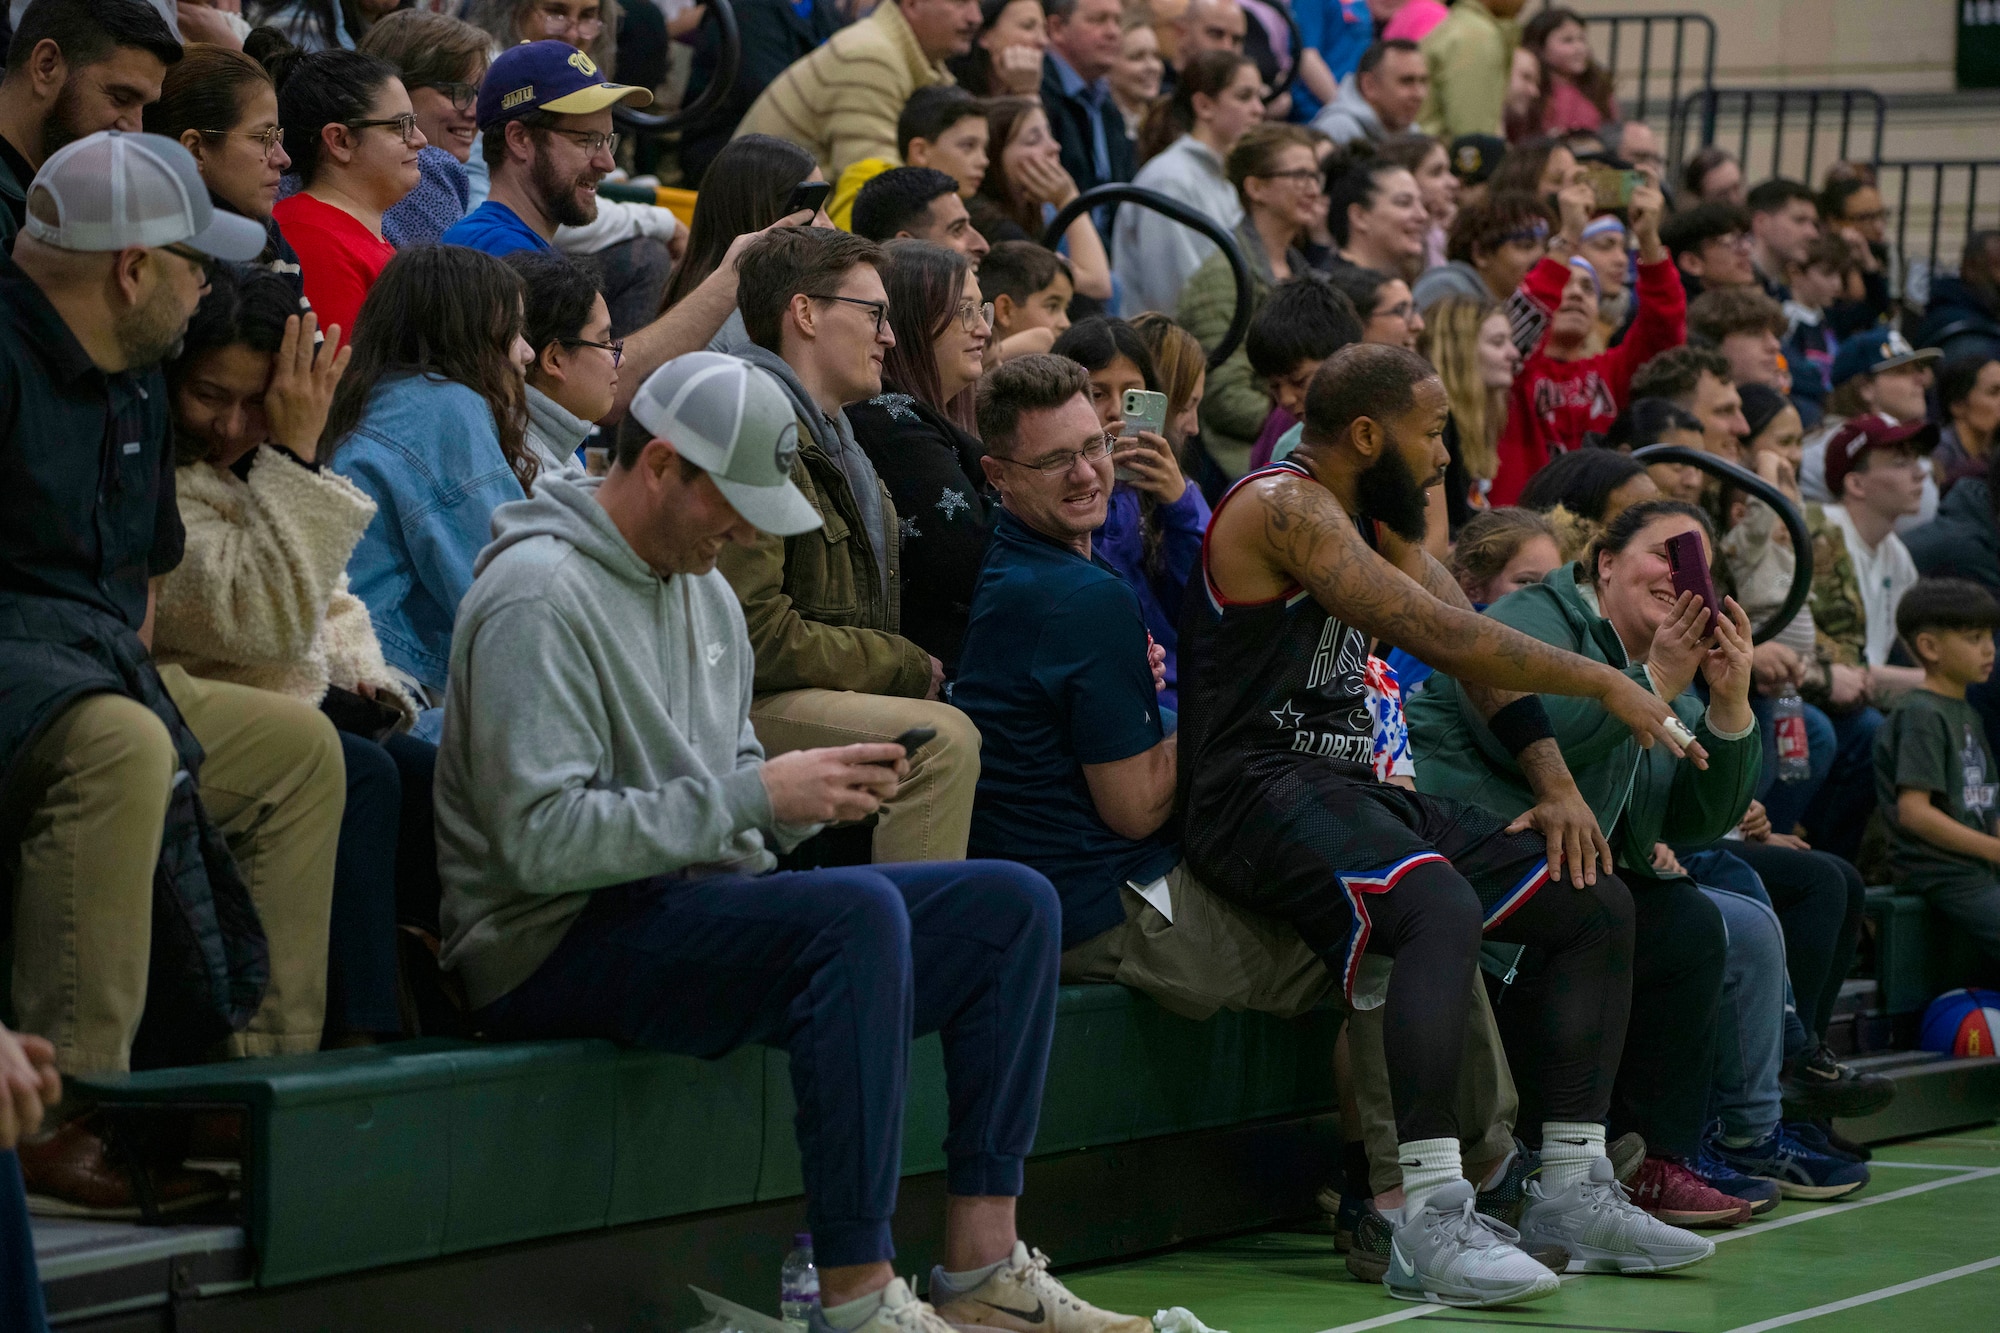 Darnell “Speedy” Artis, Harlem Globetrotters guard, left, takes a seat on an unsuspecting spectator at RAF Alconbury